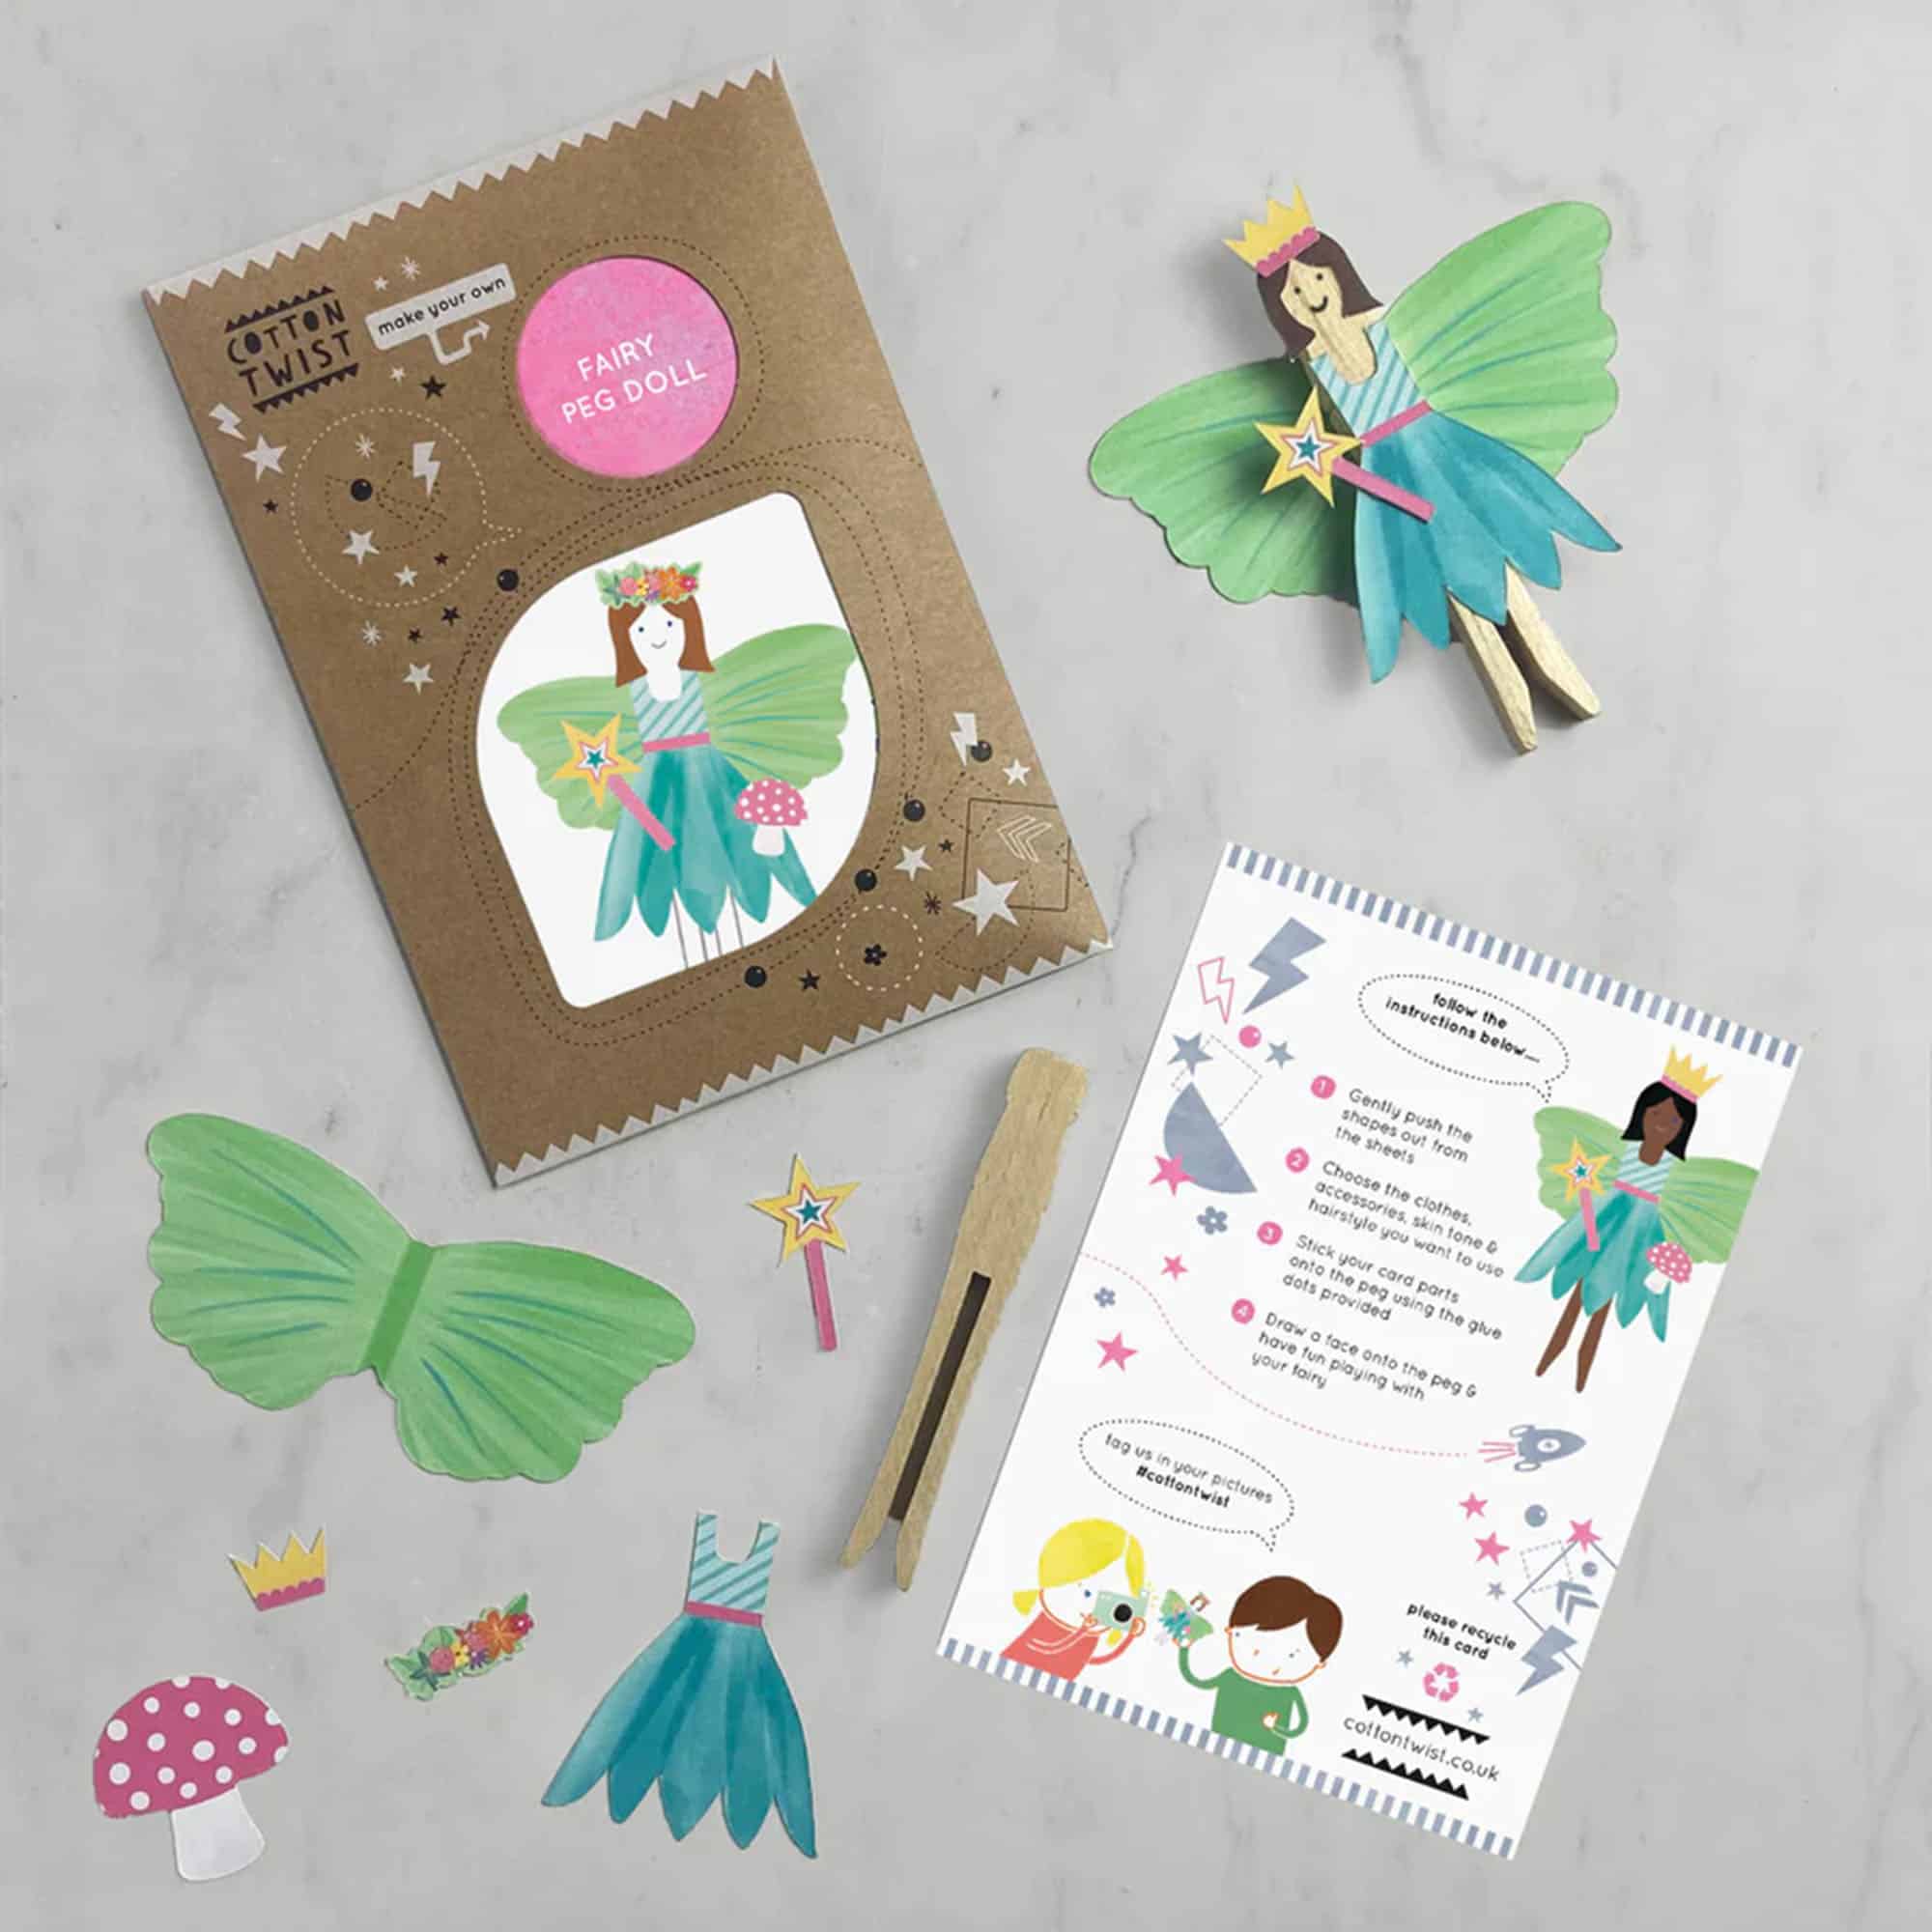 Make-Your-Own-Fairy-Peg-Doll-3